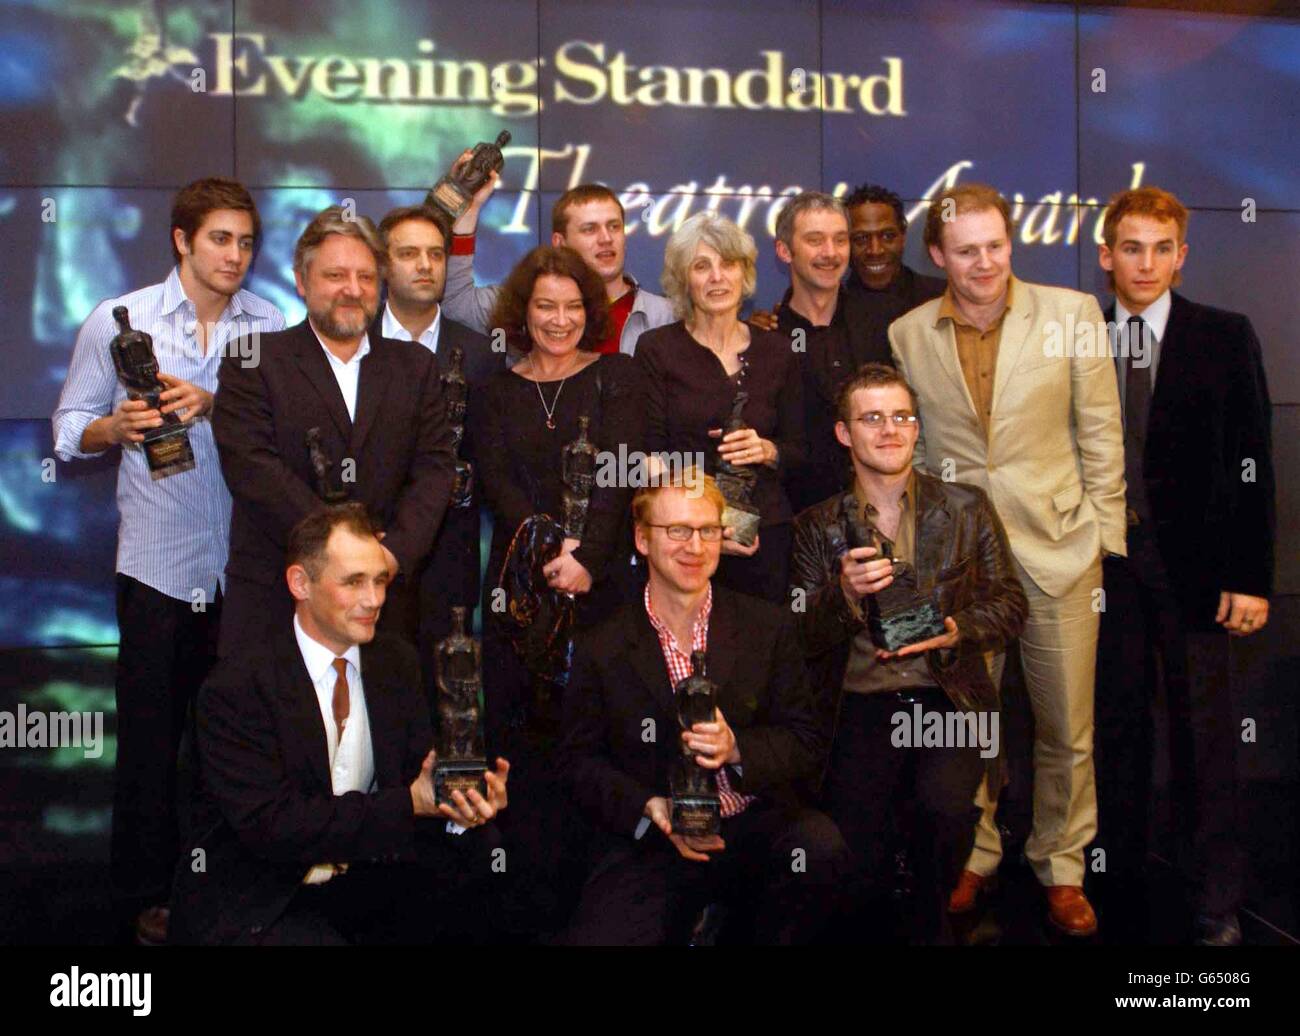 Awards winners (back row from left) Jake Gyllenhaal, Simon Russell Beale, Sam Mendes, Clare Higgins, Vassily Sigarev, Caryl Churchill, Tony Timberlake, Cornell John, David Ganly, Paul Keating and (front row (from left) Mark Rylance, Ian MacNeil, Samuel Jones. *..During the Evening Standard Theatre Awards at The Savoy in London . The annual awards ceremony showcases an array emerging acting talent. Stock Photo